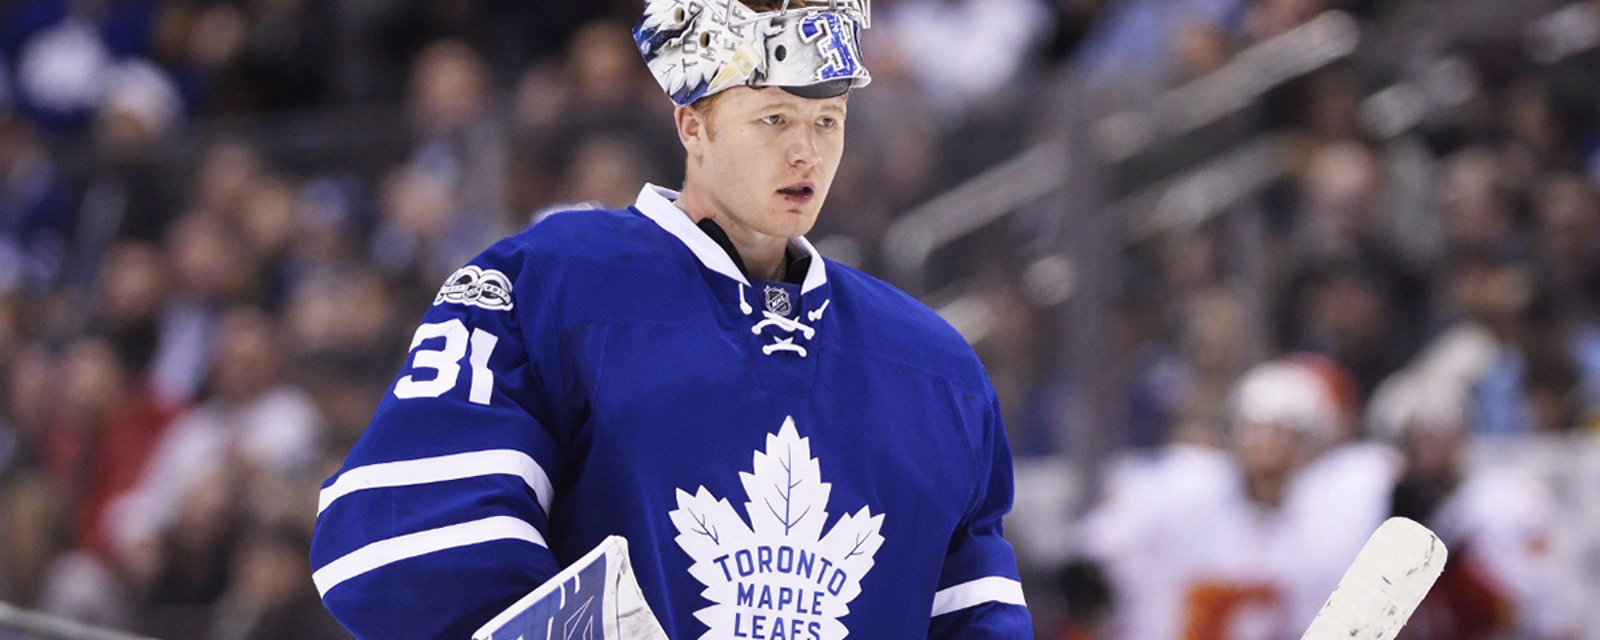 Breaking: Andersen out, Leafs call up goalie from Marlies